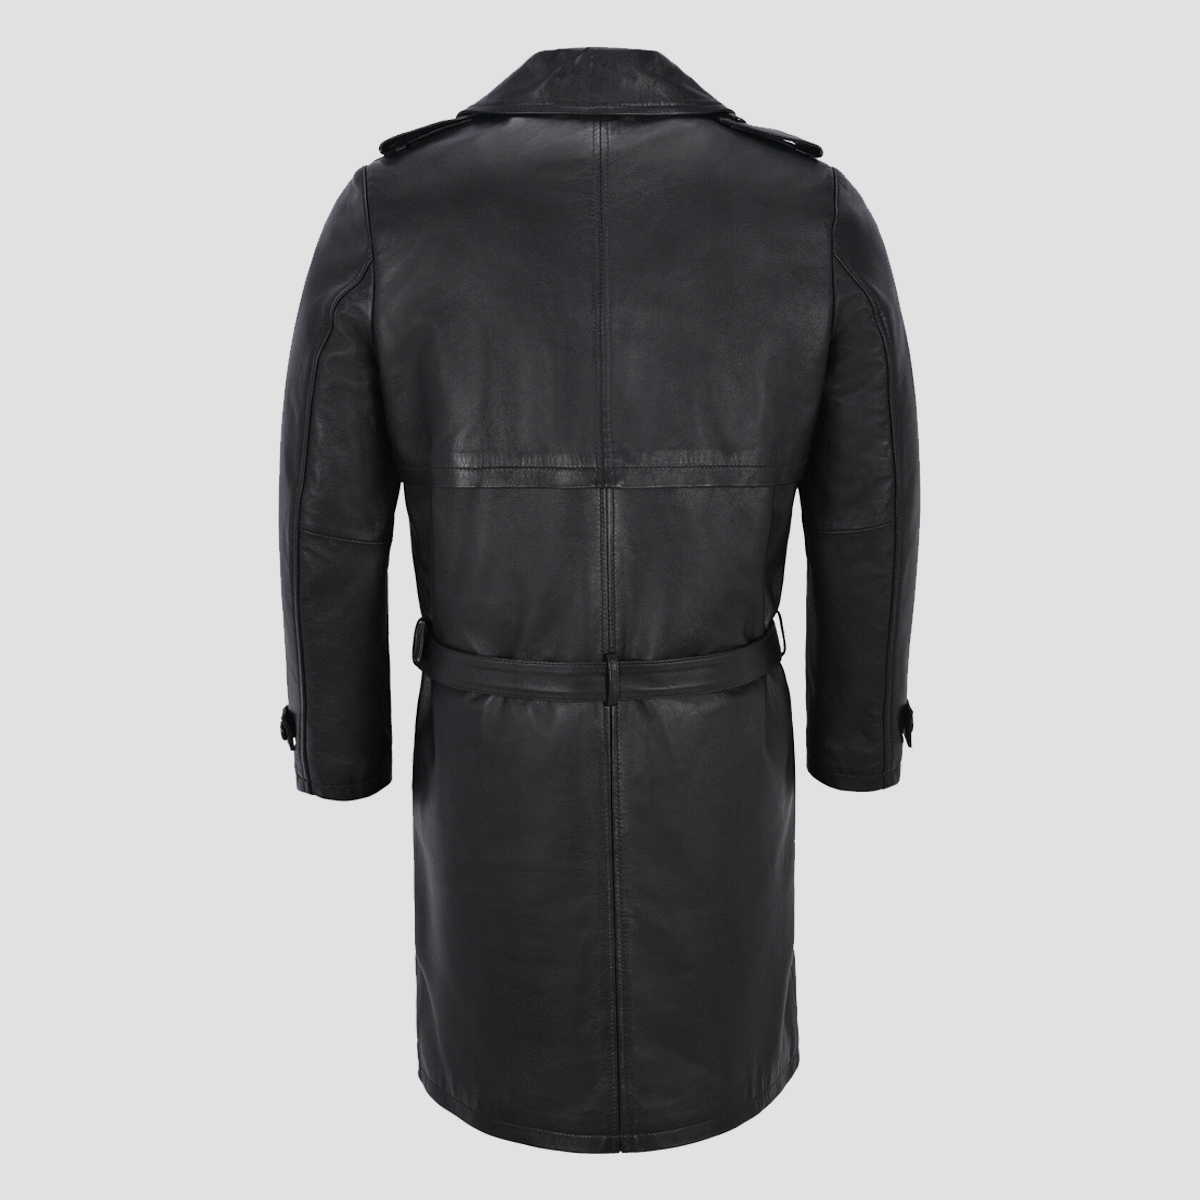 Daniel Black Leather Trench Coat - The Vintage Leather